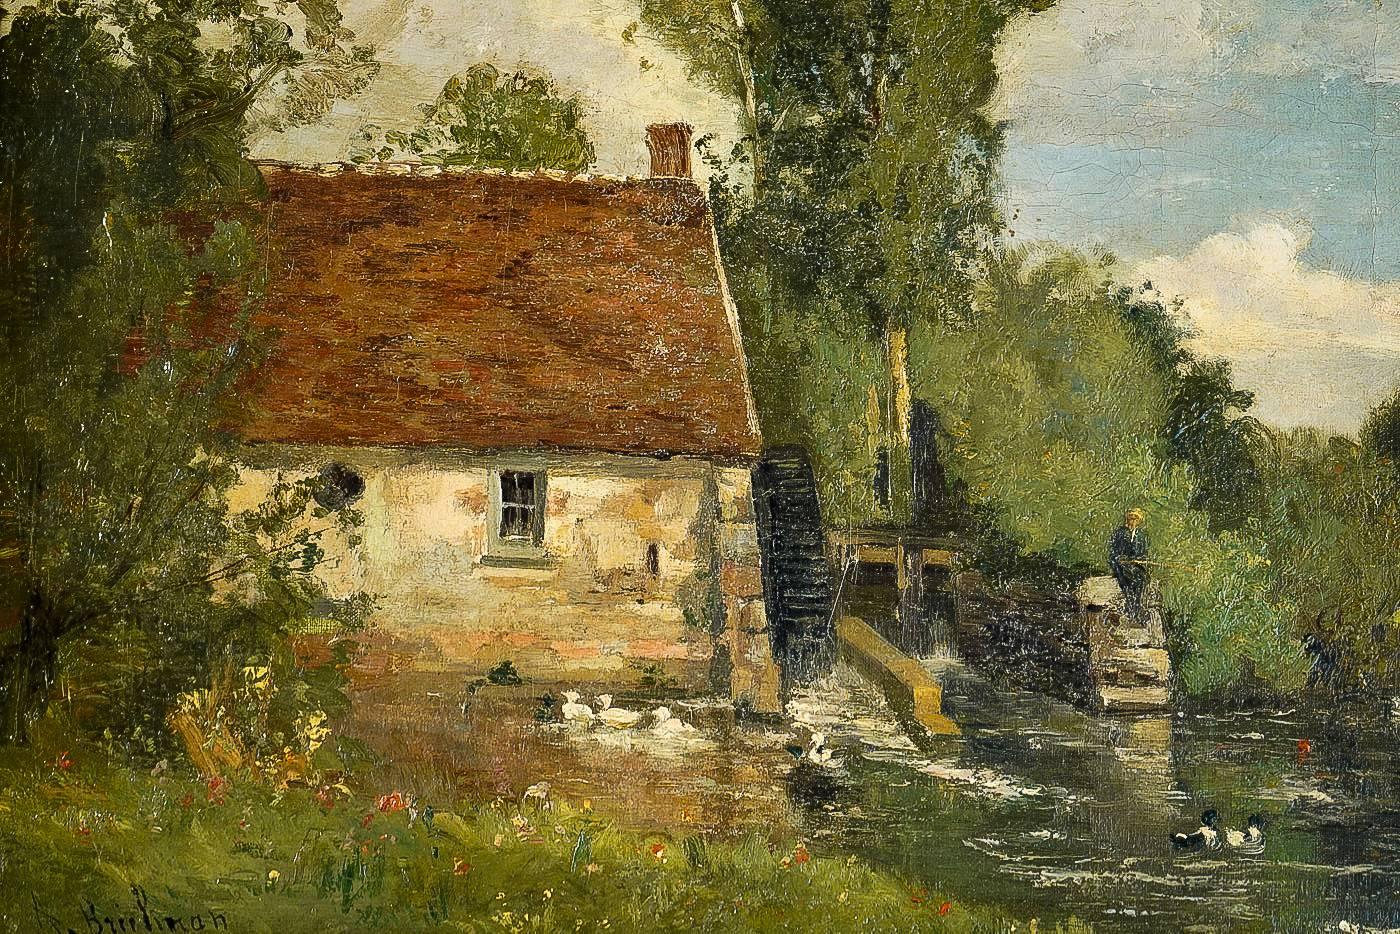 French Brielman Jacques Alfred, Old Mill by a River, Oil on Canvas, circa 1860-1870